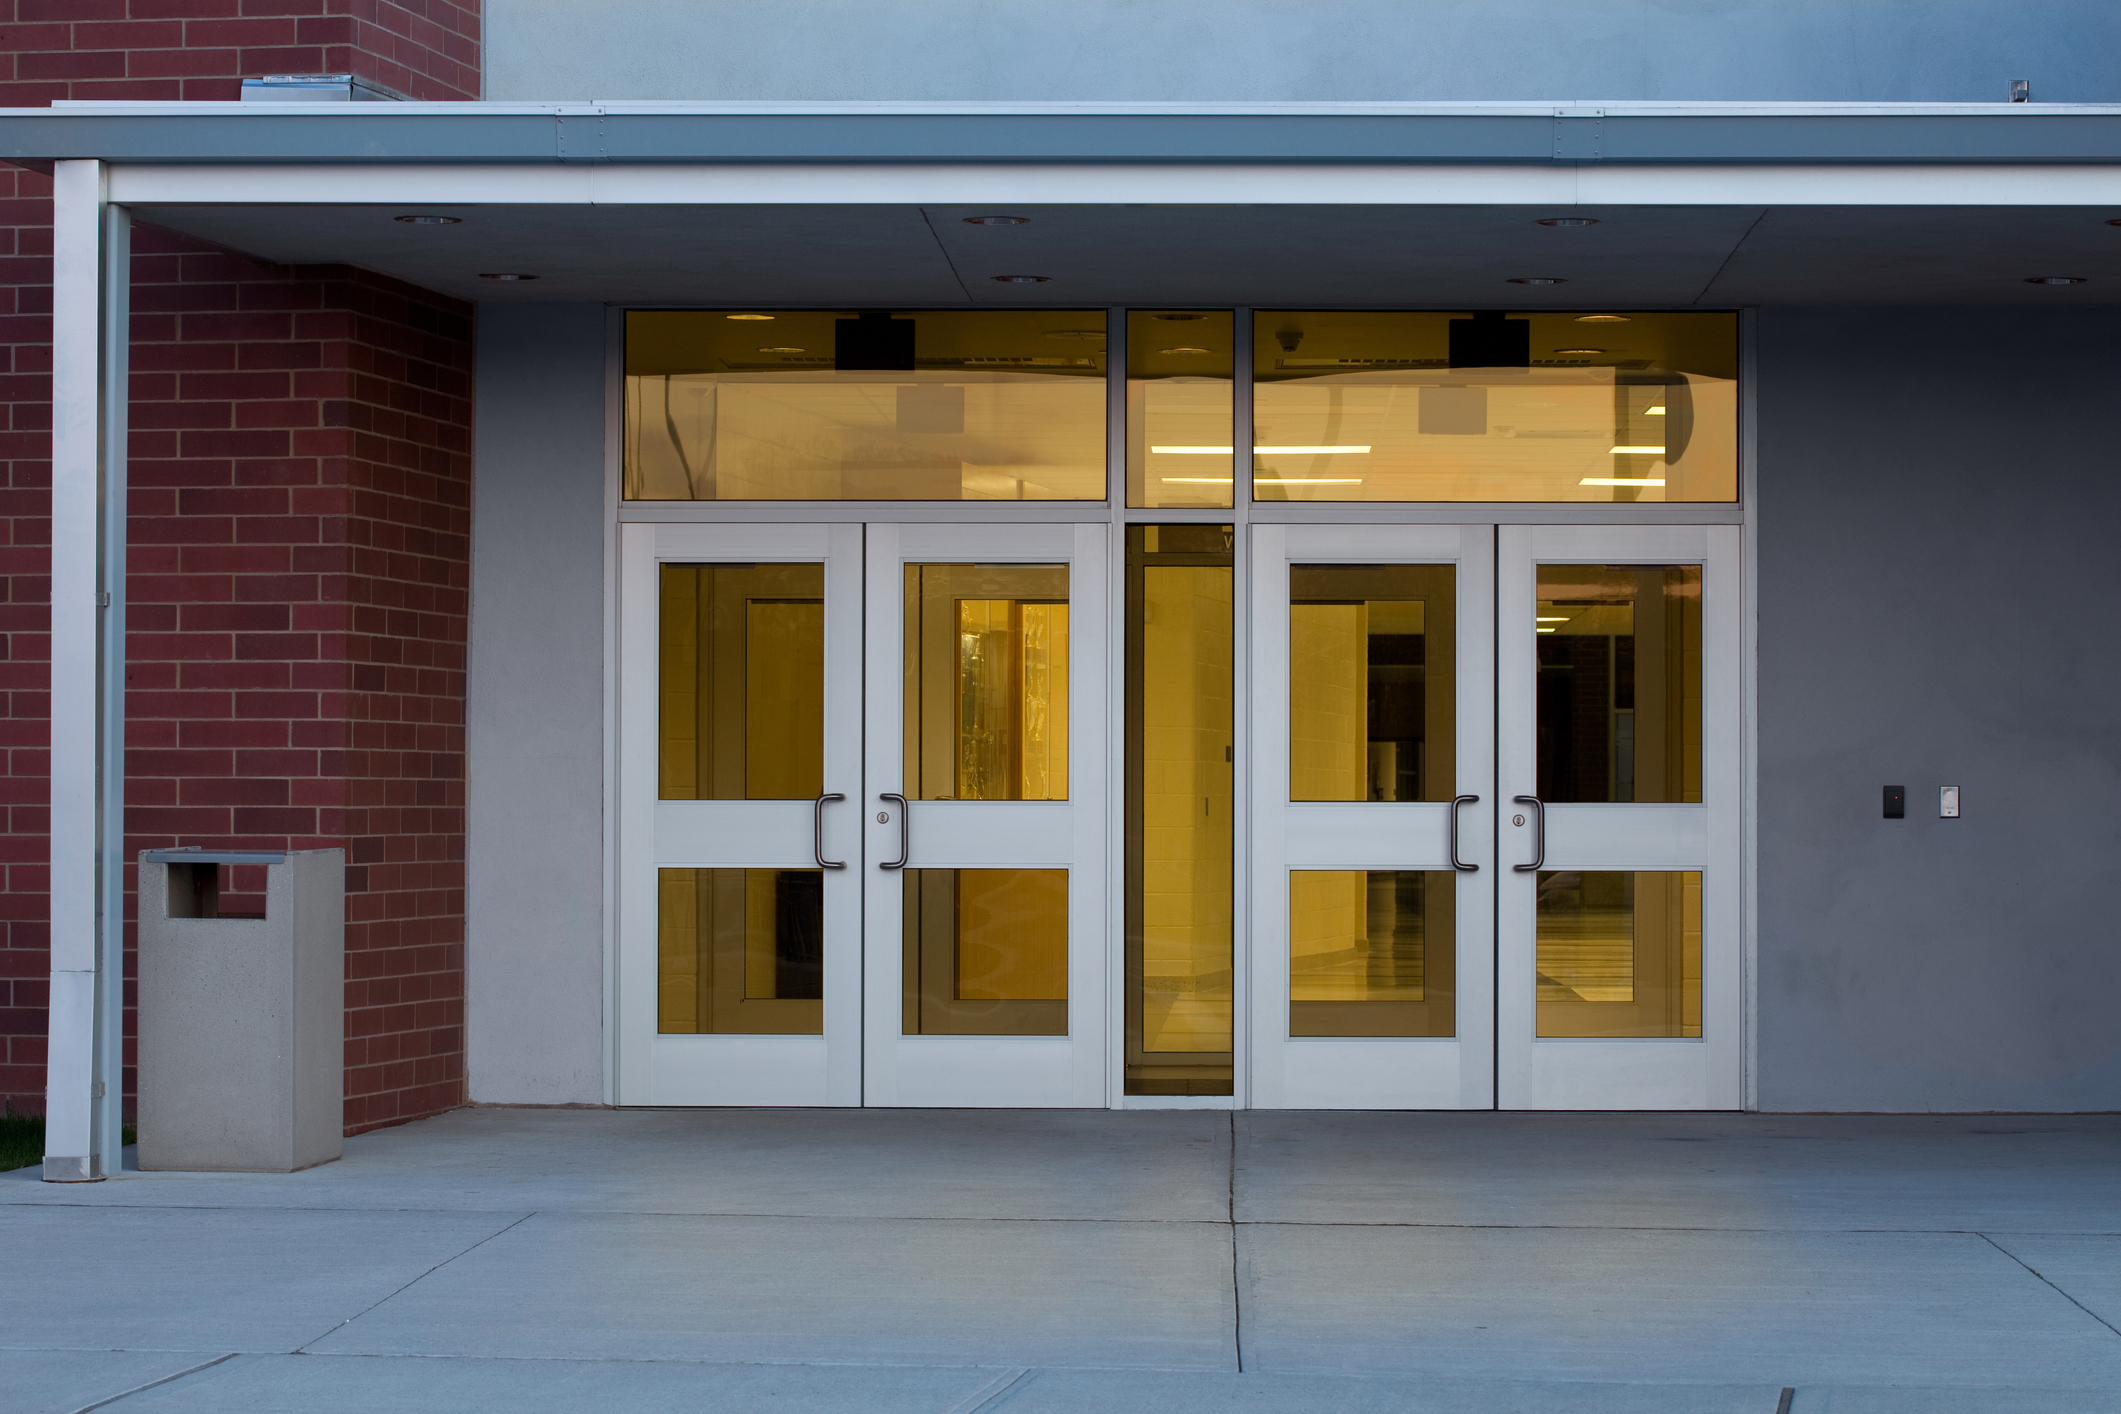 Entrance to a modern building with four glass doors and a brick wall on the left, with no people present